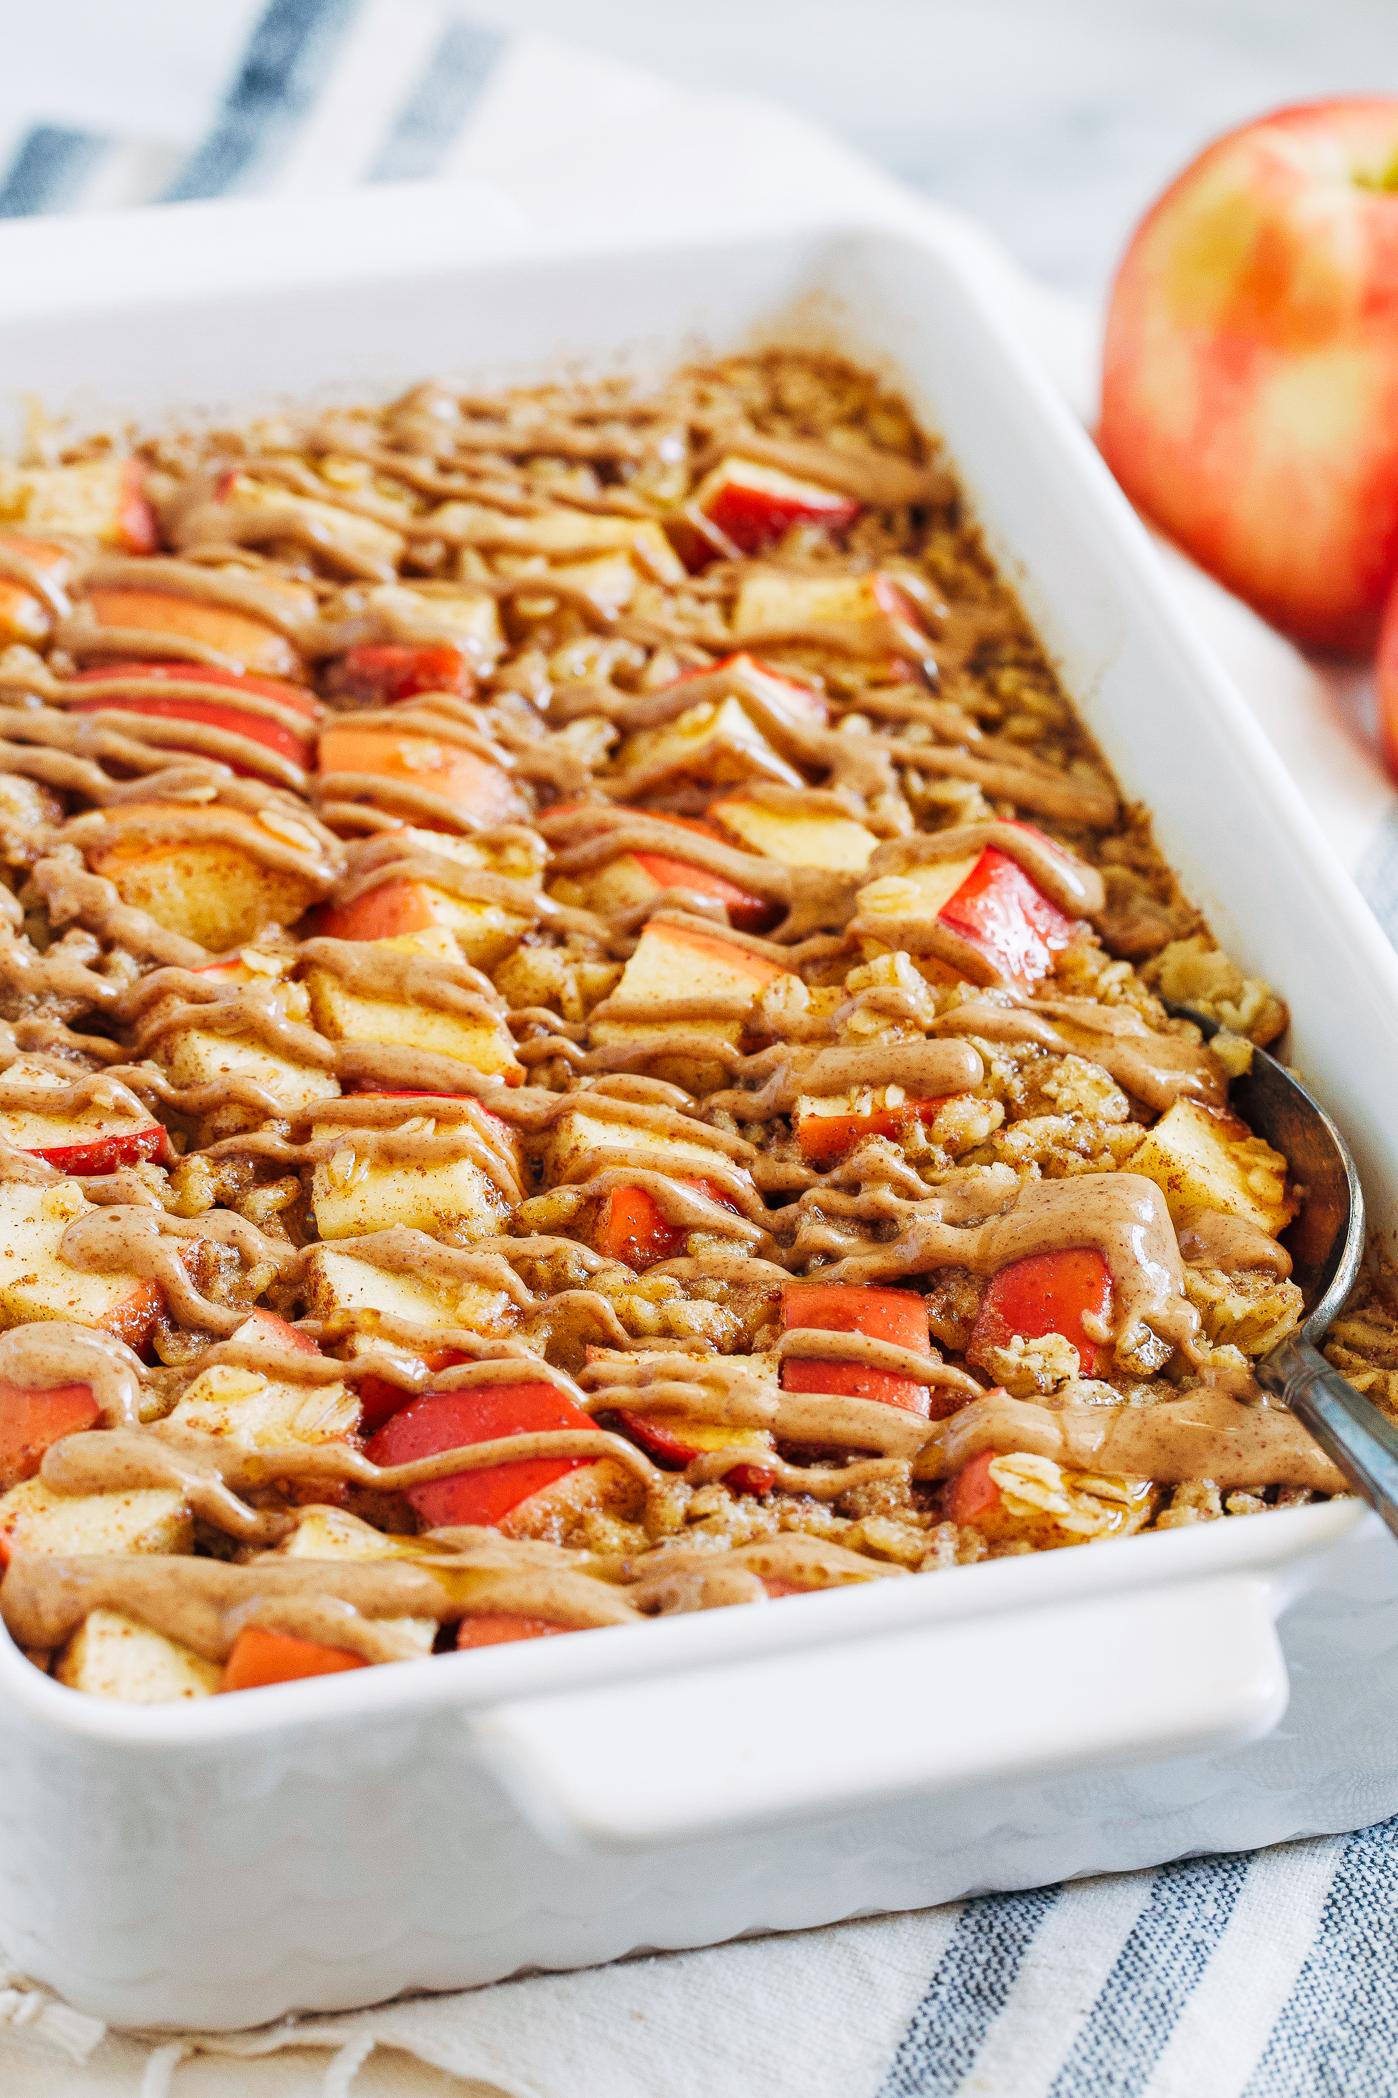  A mouth-watering treat to start your day with full of fiber, protein and nutrients.